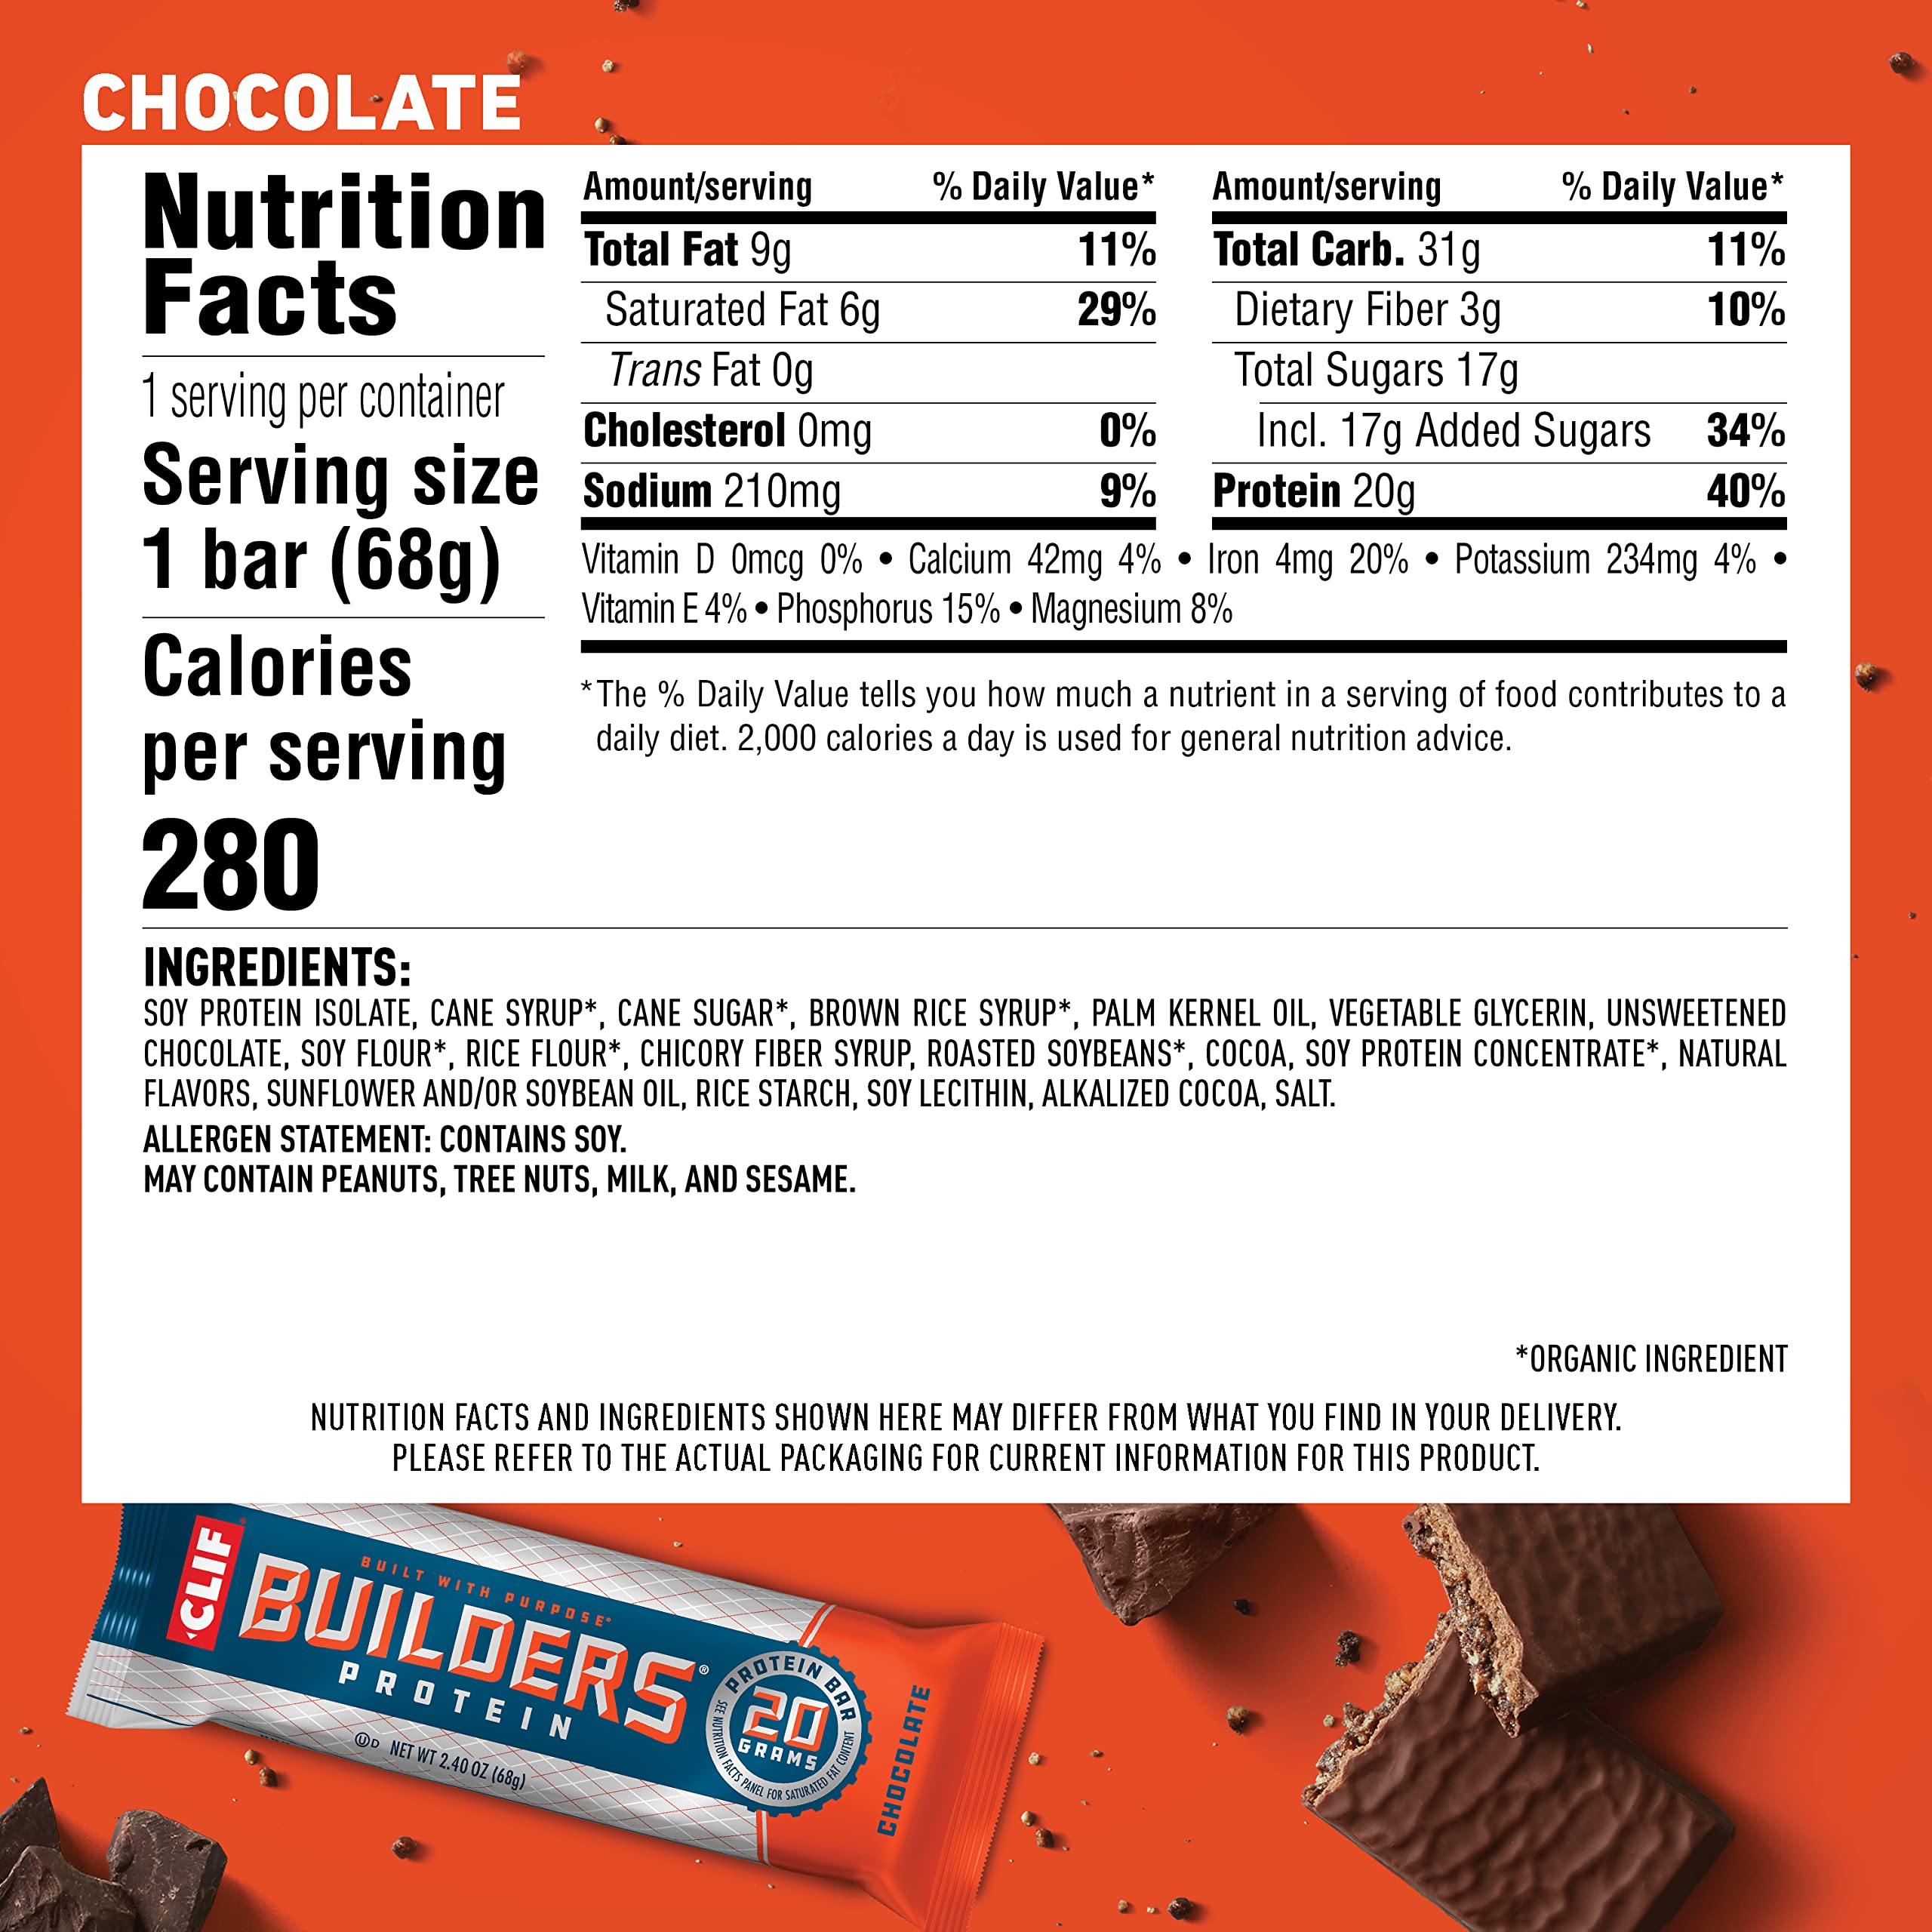 CLIF BUILDERS - Protein Bars - Chocolate - 12 Count + CLIF Builders - Protein Bars - Vanilla - 12 Count